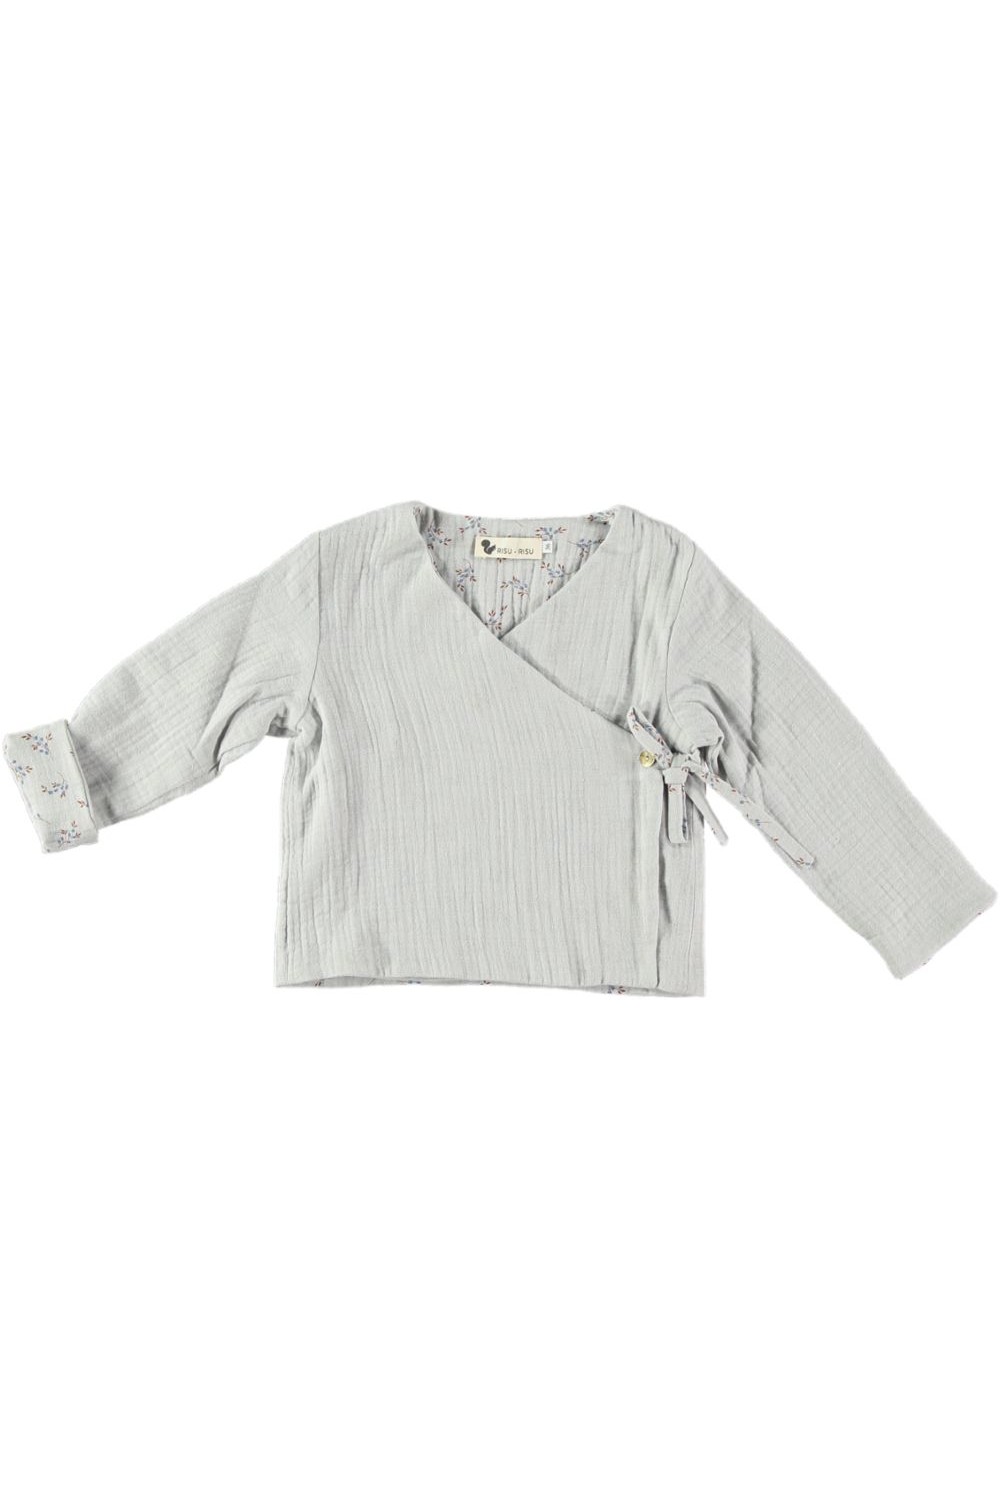 butterfly grey baby jacket